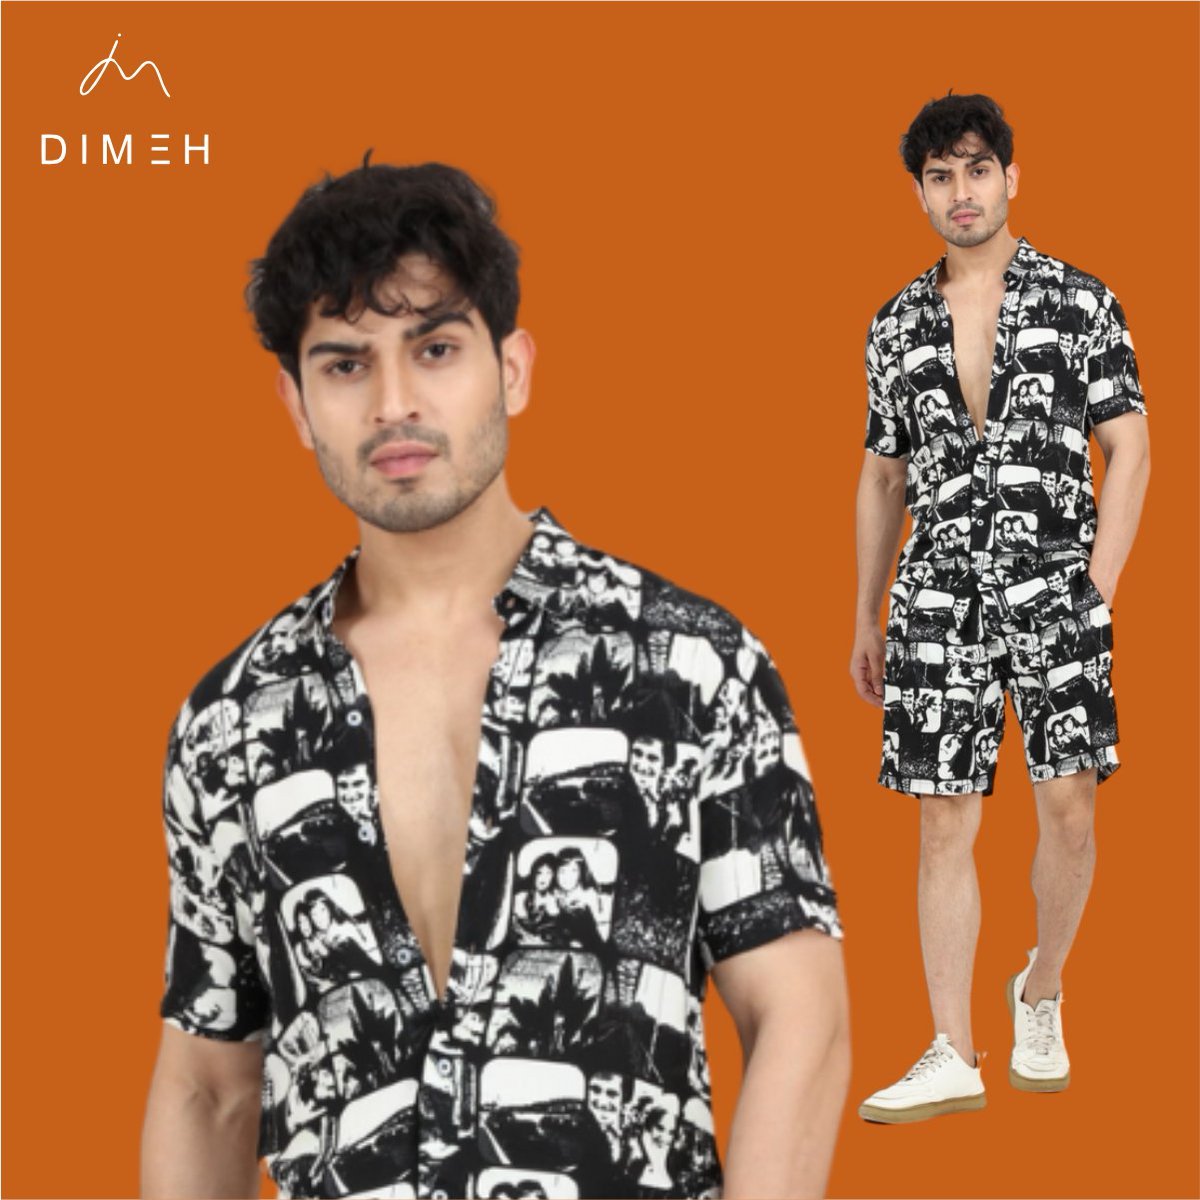 Try our CO-ORDS; that’s perfect combo of STYLE & COLOUR that will never run out of fashion!
.
.
.
.
#Dimeh #DimehClothing #clothingapparel #printedcoords #youthwear #streetwearblog
#casualfashion #coordsets #mensfashiontrends #printedshirtsformen #shirtswag